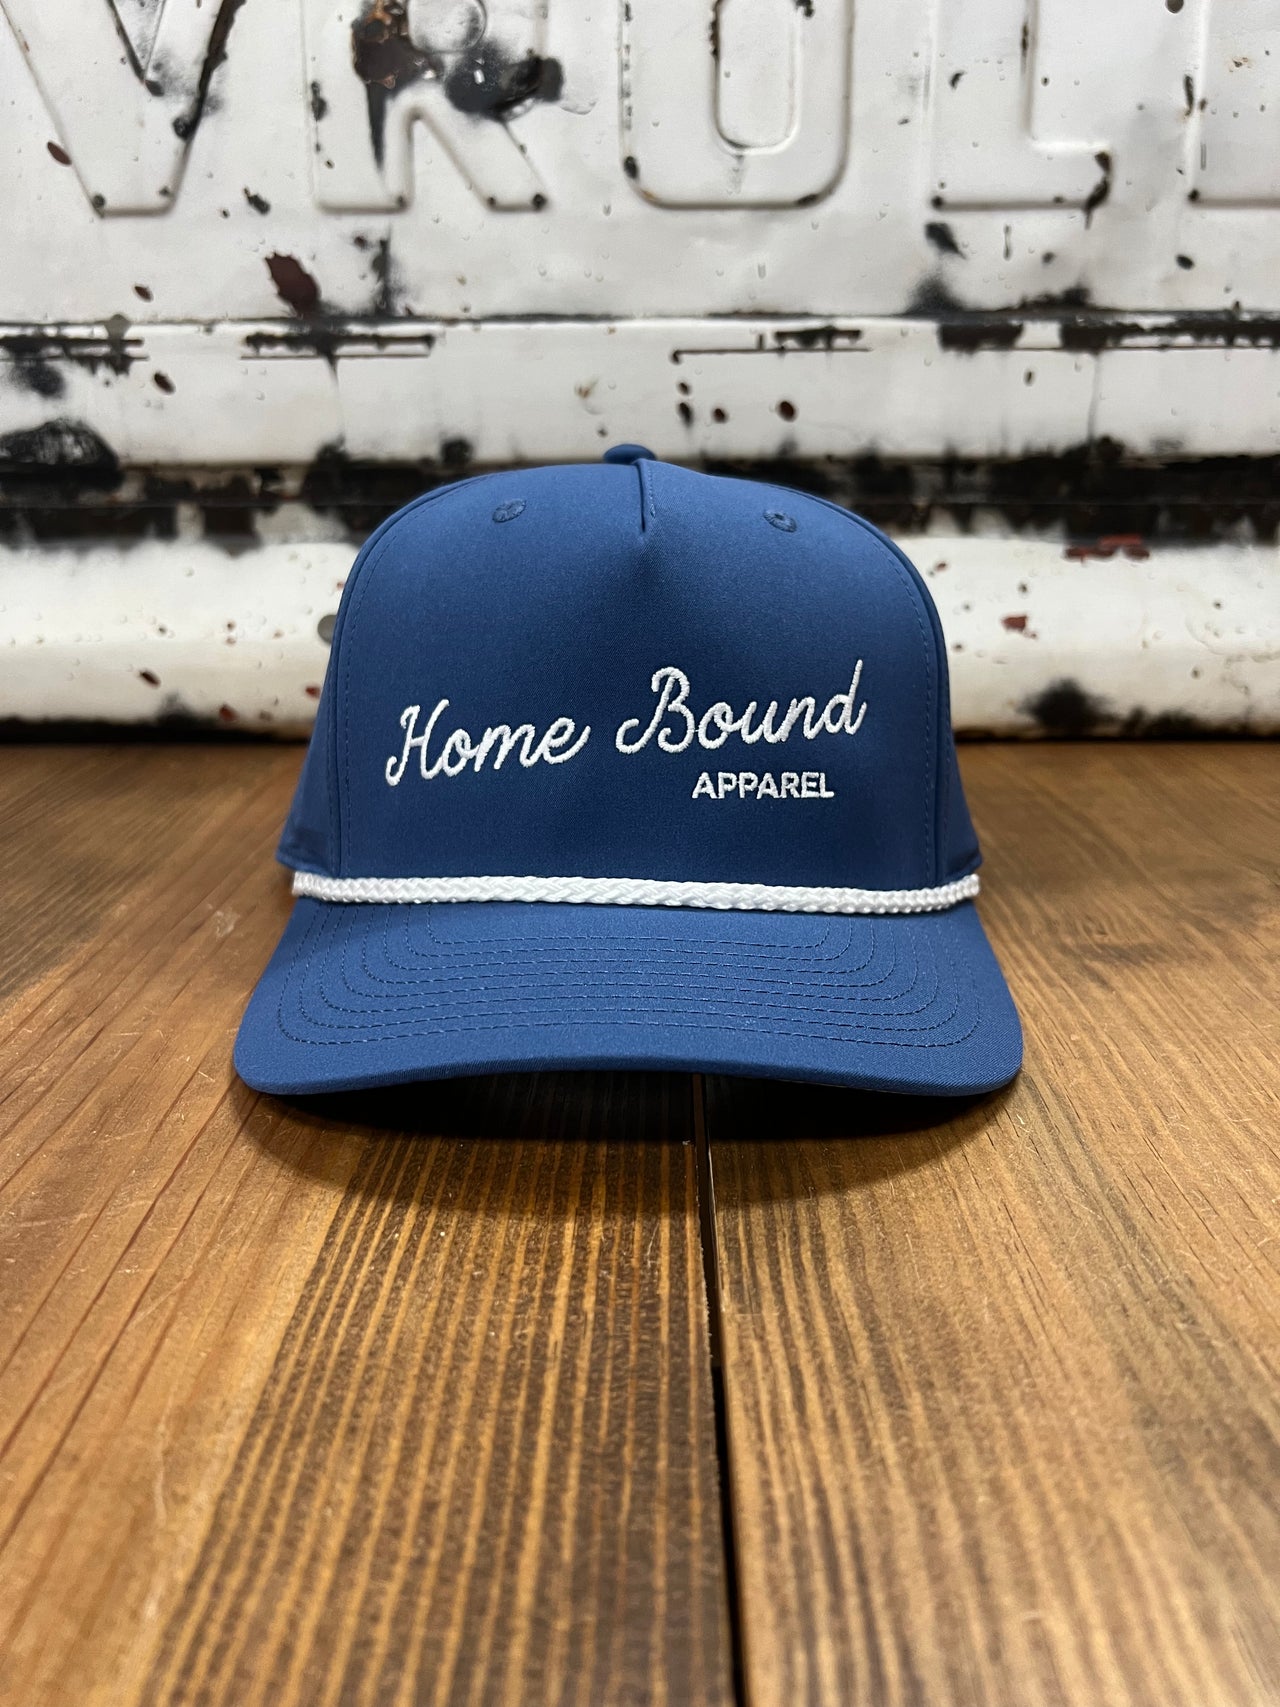 Home Bound Golf Performance Rope Cap - Blue with White Rope